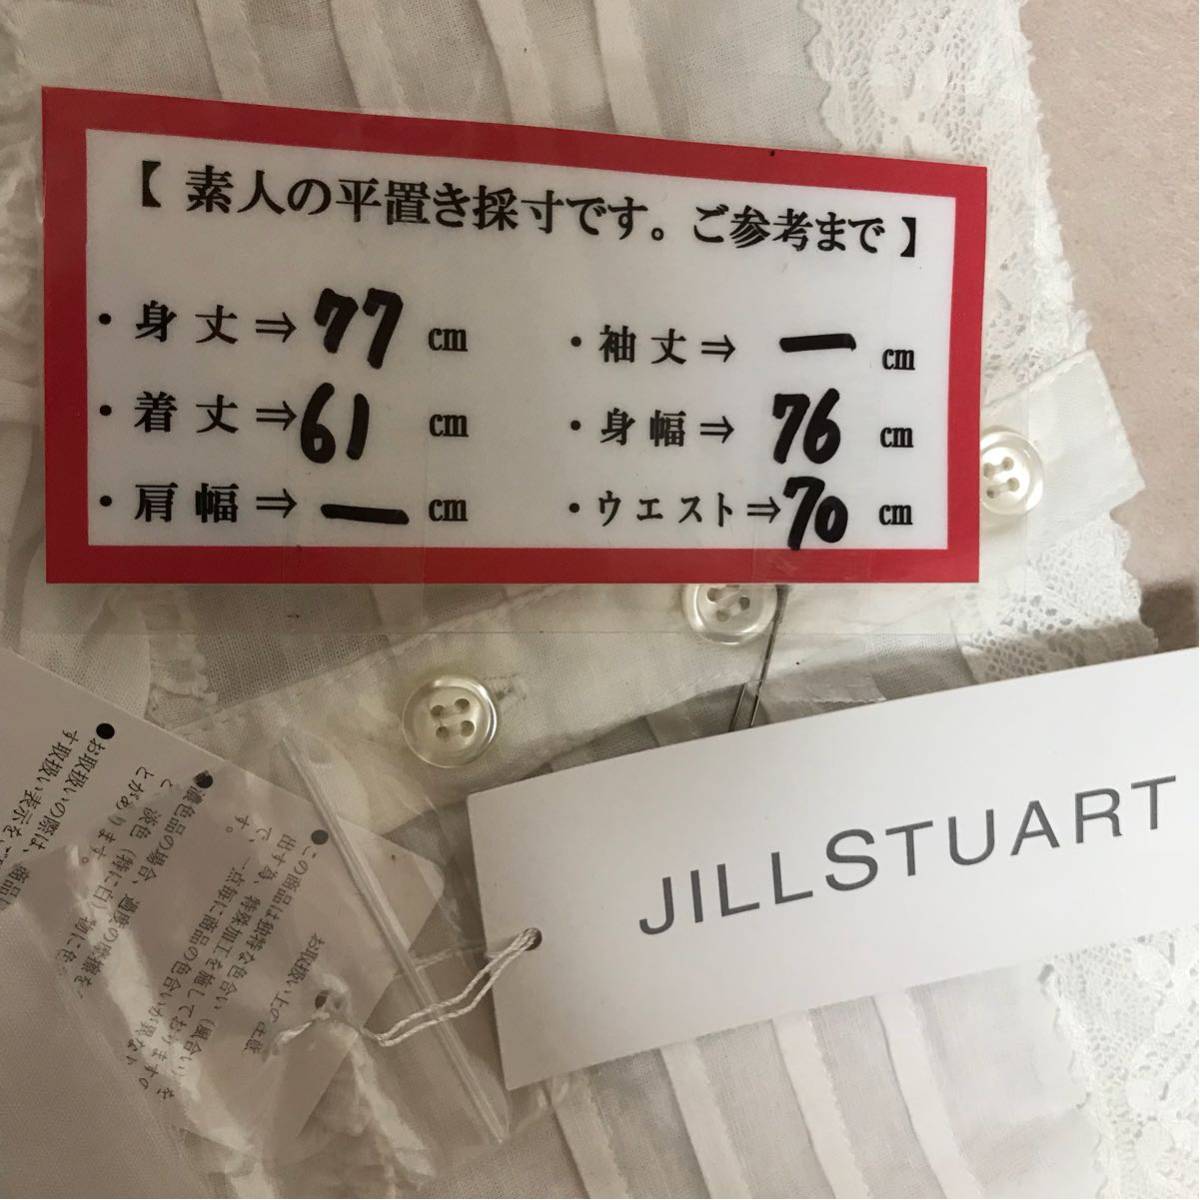 JILL STUART new goods * Mini One-piece lady's first come, first served super-discount wonderful brand on goods pretty liquidation goods sale tag attaching stylish white white 